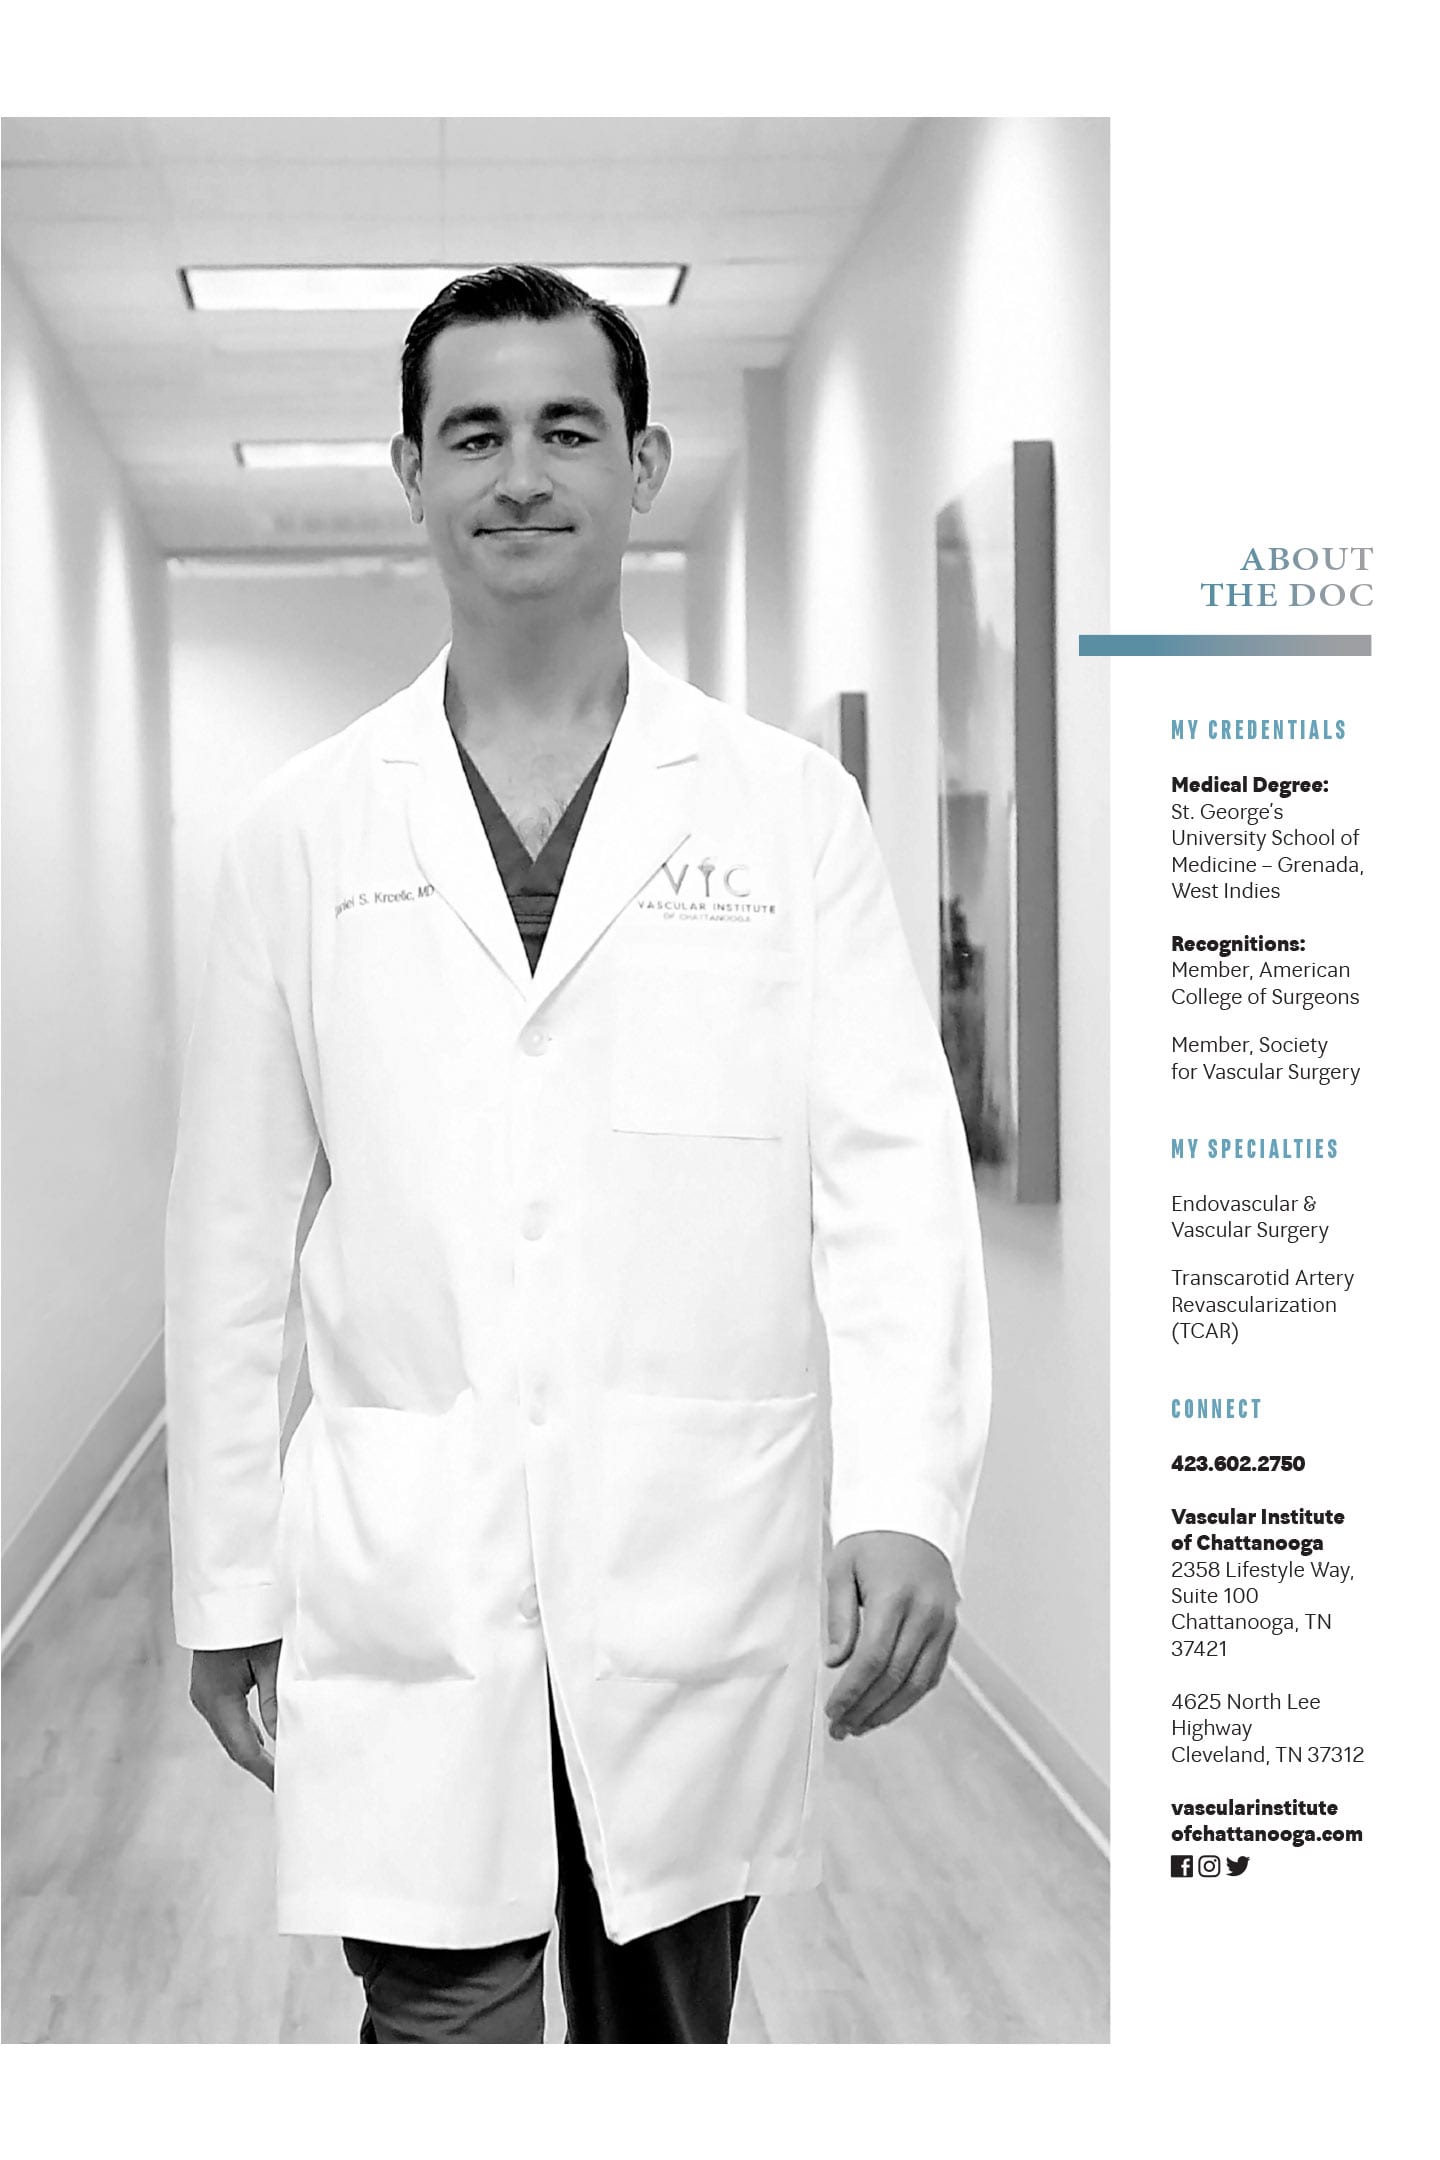 about Dr. Daniel Krcelic at vascular institute of chattanooga